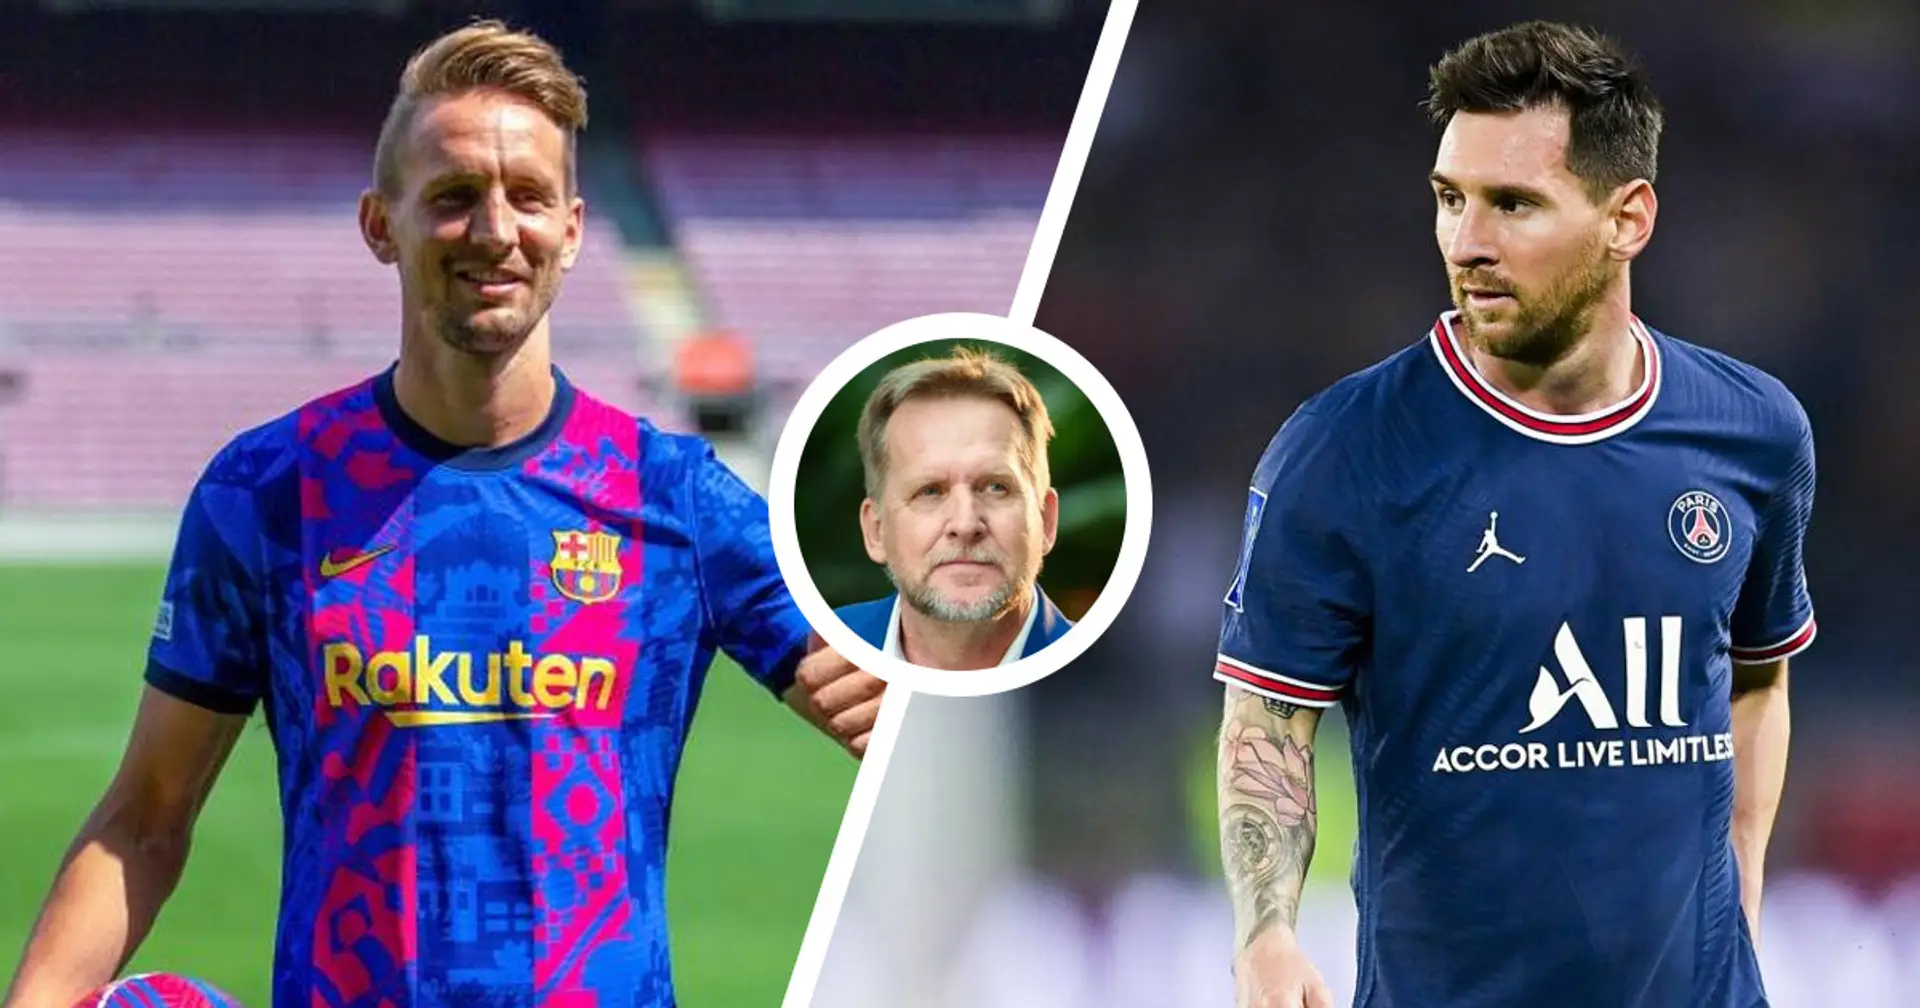 'The squad is not good enough to top La Liga. Luuk de Jong proves this': Barca great Schuster